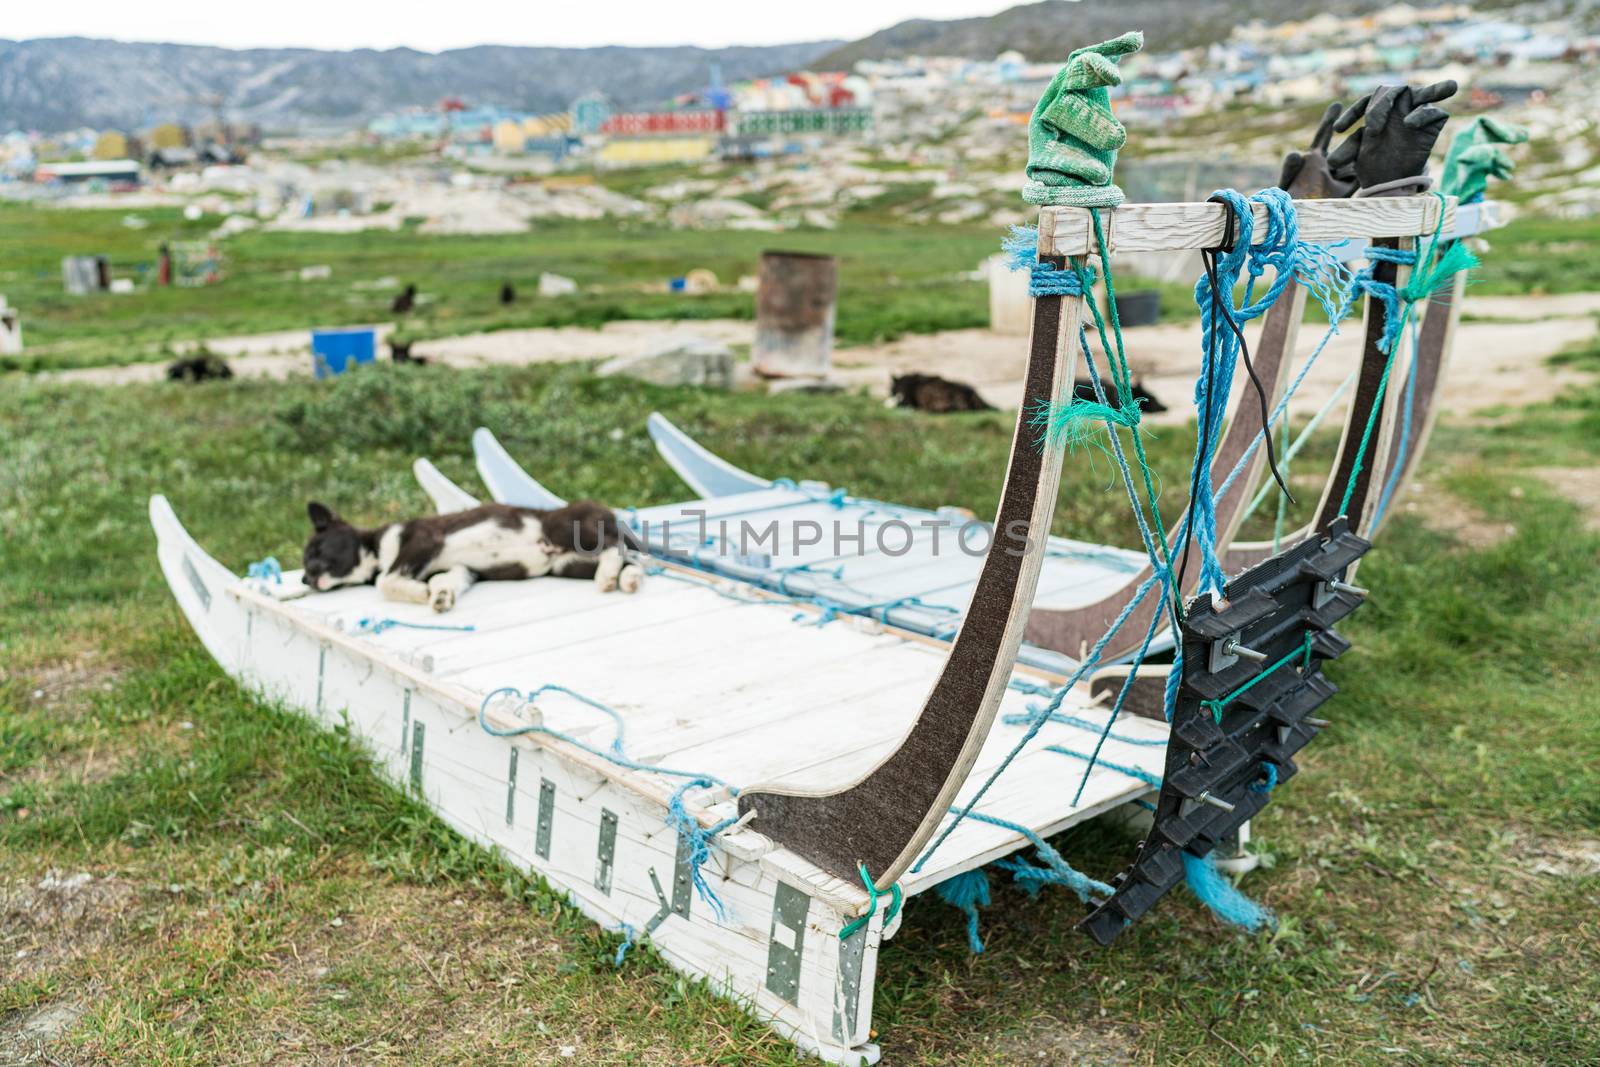 Greenland dog sled and husky sled dog puppy in Ilulissat Greenland. Two dog sleds parked in summer nature landscape on Greenland.